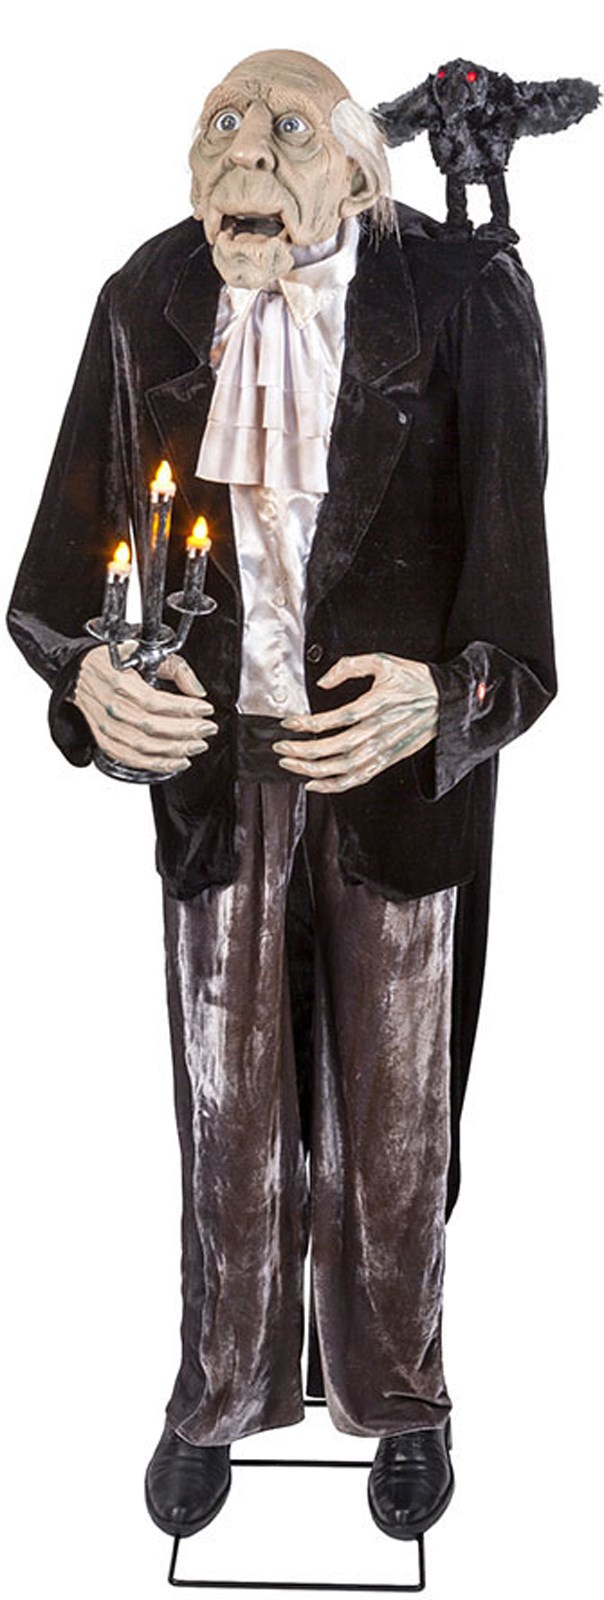 Animated Talking Butler And Crow With Light Up Candelabra